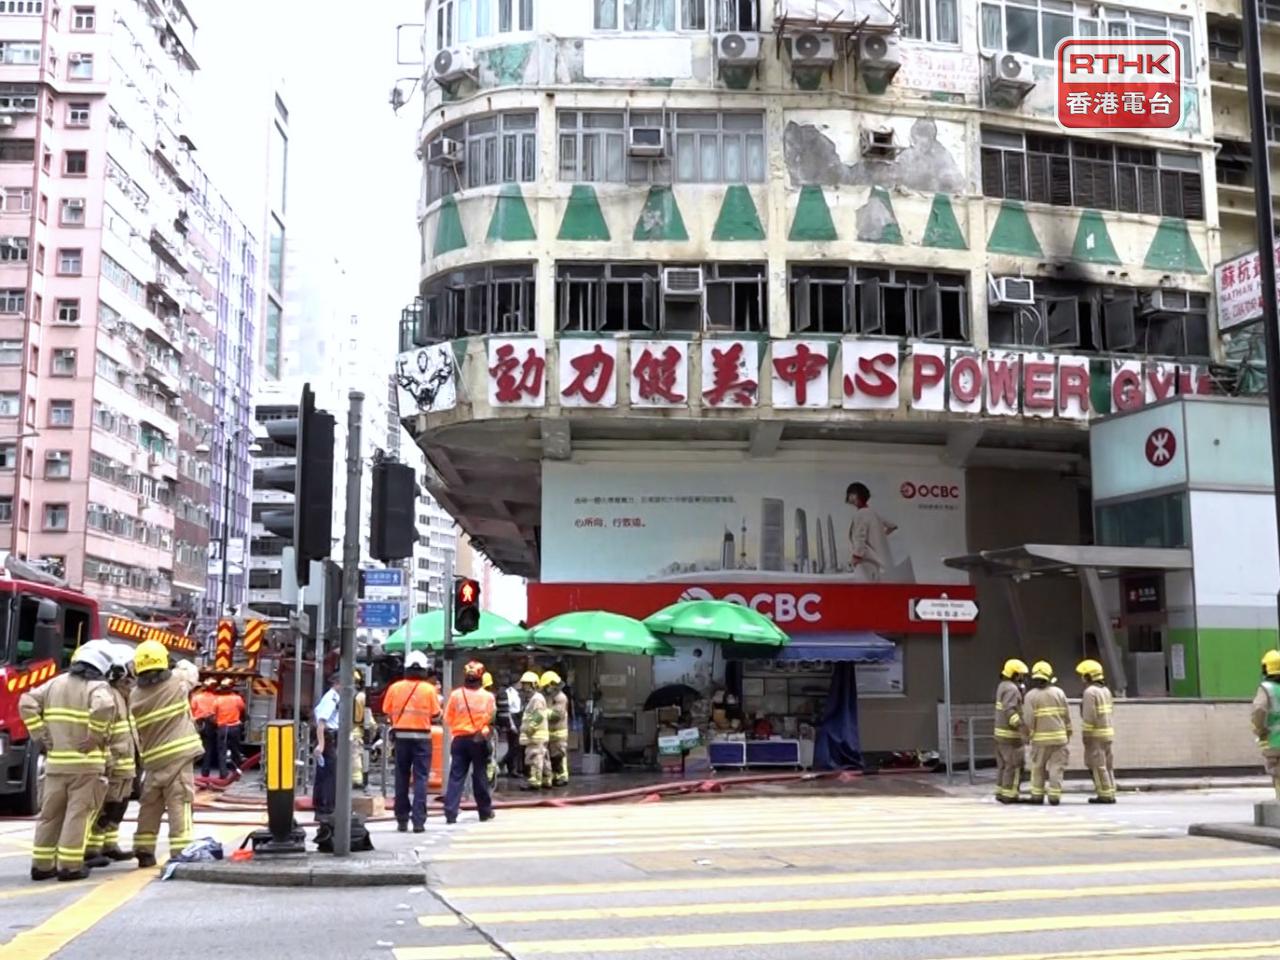 Chris Tang pressed by councillors over deadly blaze